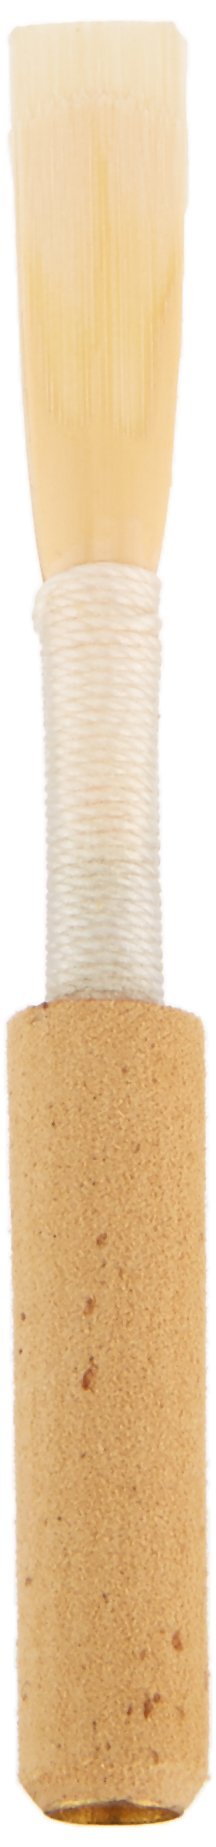 Richards RDR-1001 Oboe Double Reed, Soft